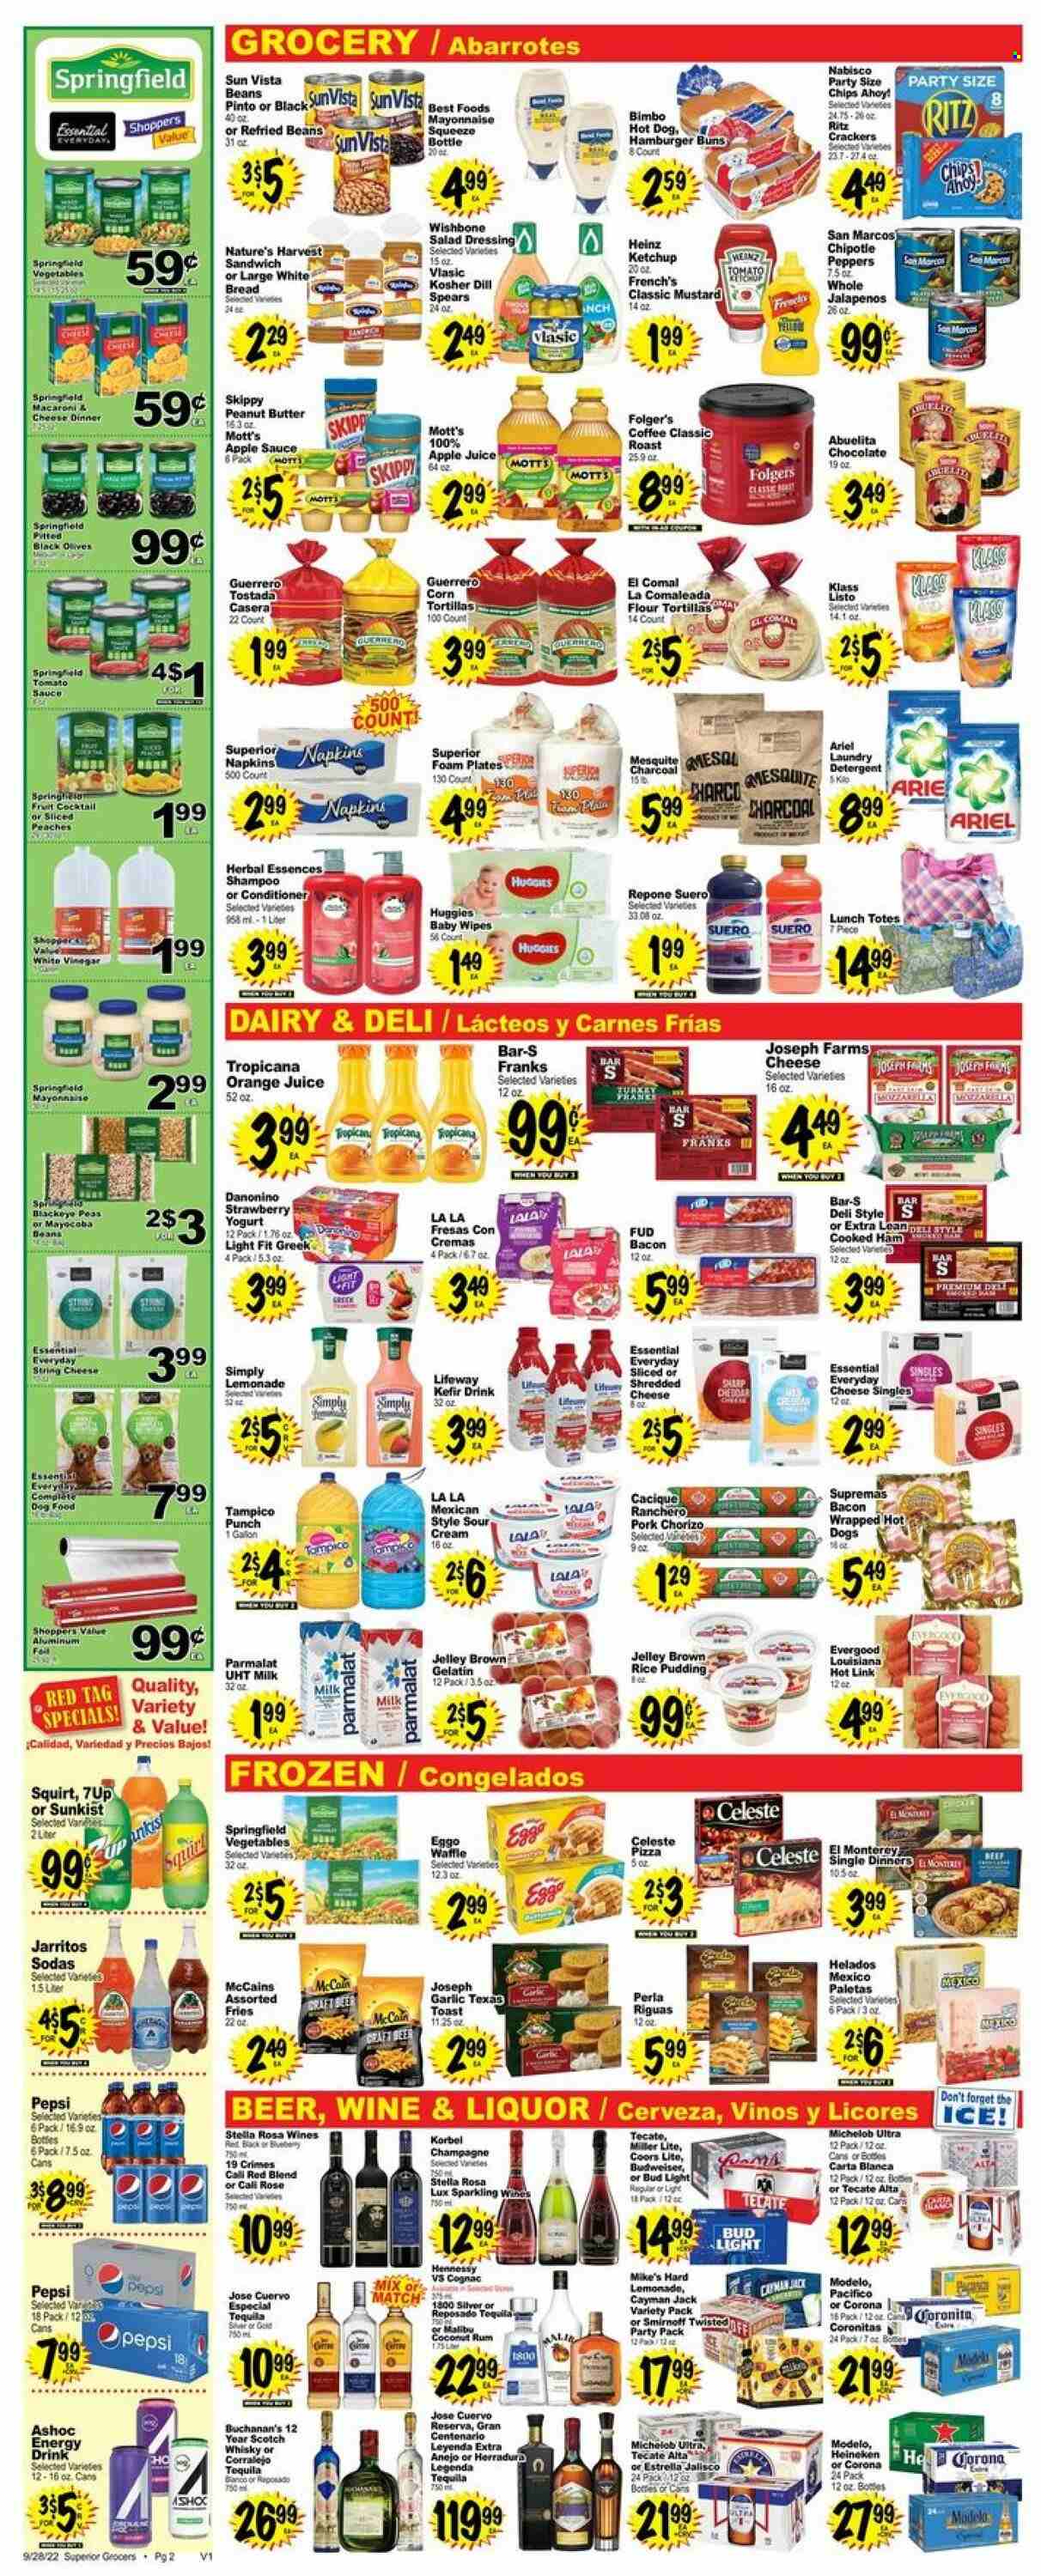 thumbnail - Superior Grocers Flyer - 09/28/2022 - 10/04/2022 - Sales products - bread, corn tortillas, tortillas, white bread, buns, burger buns, flour tortillas, garlic, peas, peppers, Mott's, macaroni & cheese, hot dog, pizza, sandwich, sauce, bacon, cooked ham, ham, chorizo, shredded cheese, string cheese, yoghurt, Parmalat, rice pudding, milk, kefir, eggs, sour cream, mayonnaise, McCain, potato fries, Celeste, chocolate, crackers, Chips Ahoy!, RITZ, refried beans, tomato sauce, Heinz, olives, brown rice, dill, mustard, salad dressing, ketchup, dressing, apple sauce, peanut butter, apple juice, lemonade, Pepsi, orange juice, juice, energy drink, 7UP, fruit punch, coffee, Folgers, sparkling wine, champagne, rosé wine, cognac, rum, Smirnoff, tequila, Hennessy, liquor, Malibu, scotch whisky, whisky, beer, Bud Light, Corona Extra, Heineken, Modelo, Ariel, laundry detergent, conditioner, Herbal Essences, plate, foam plates, Budweiser, Coors, Michelob, peaches. Page 2.